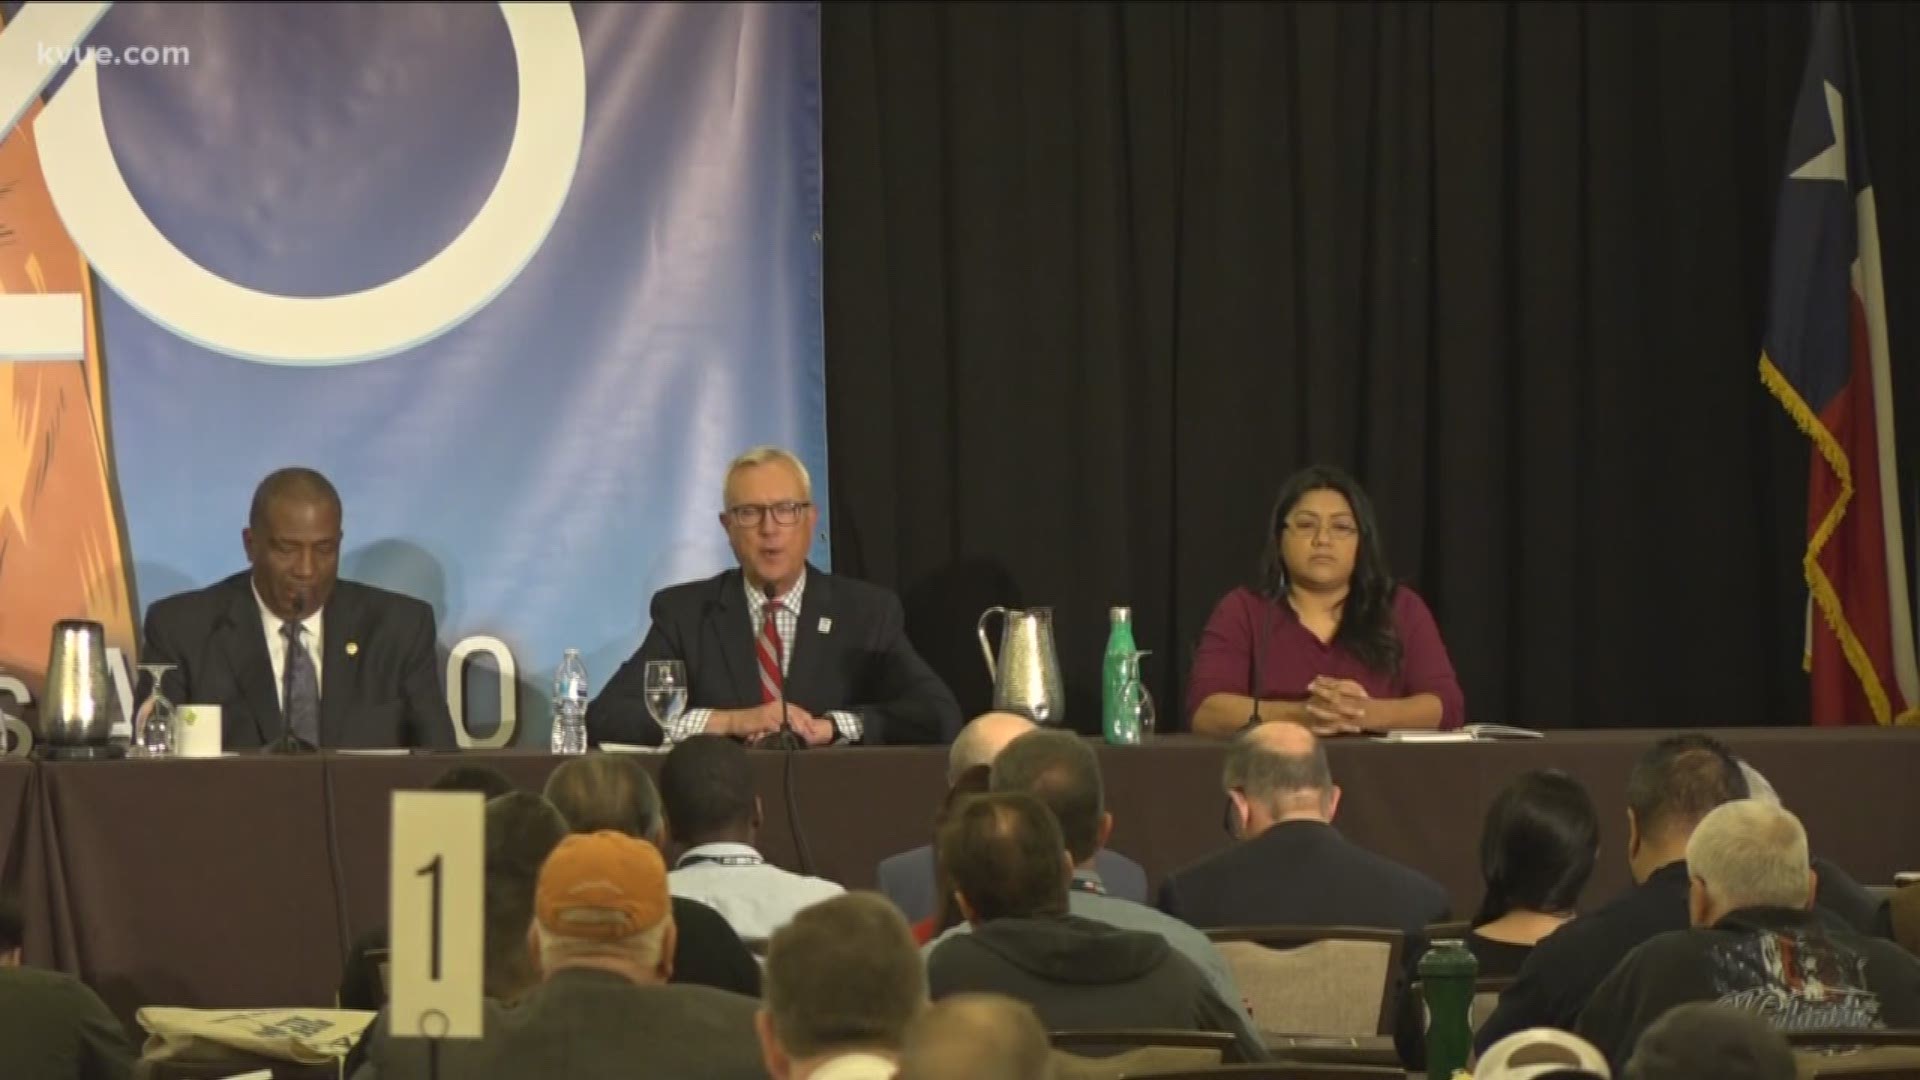 Six of the 12 Democratic candidates participated in the debate at the AFLCIO 'Cope' convention.